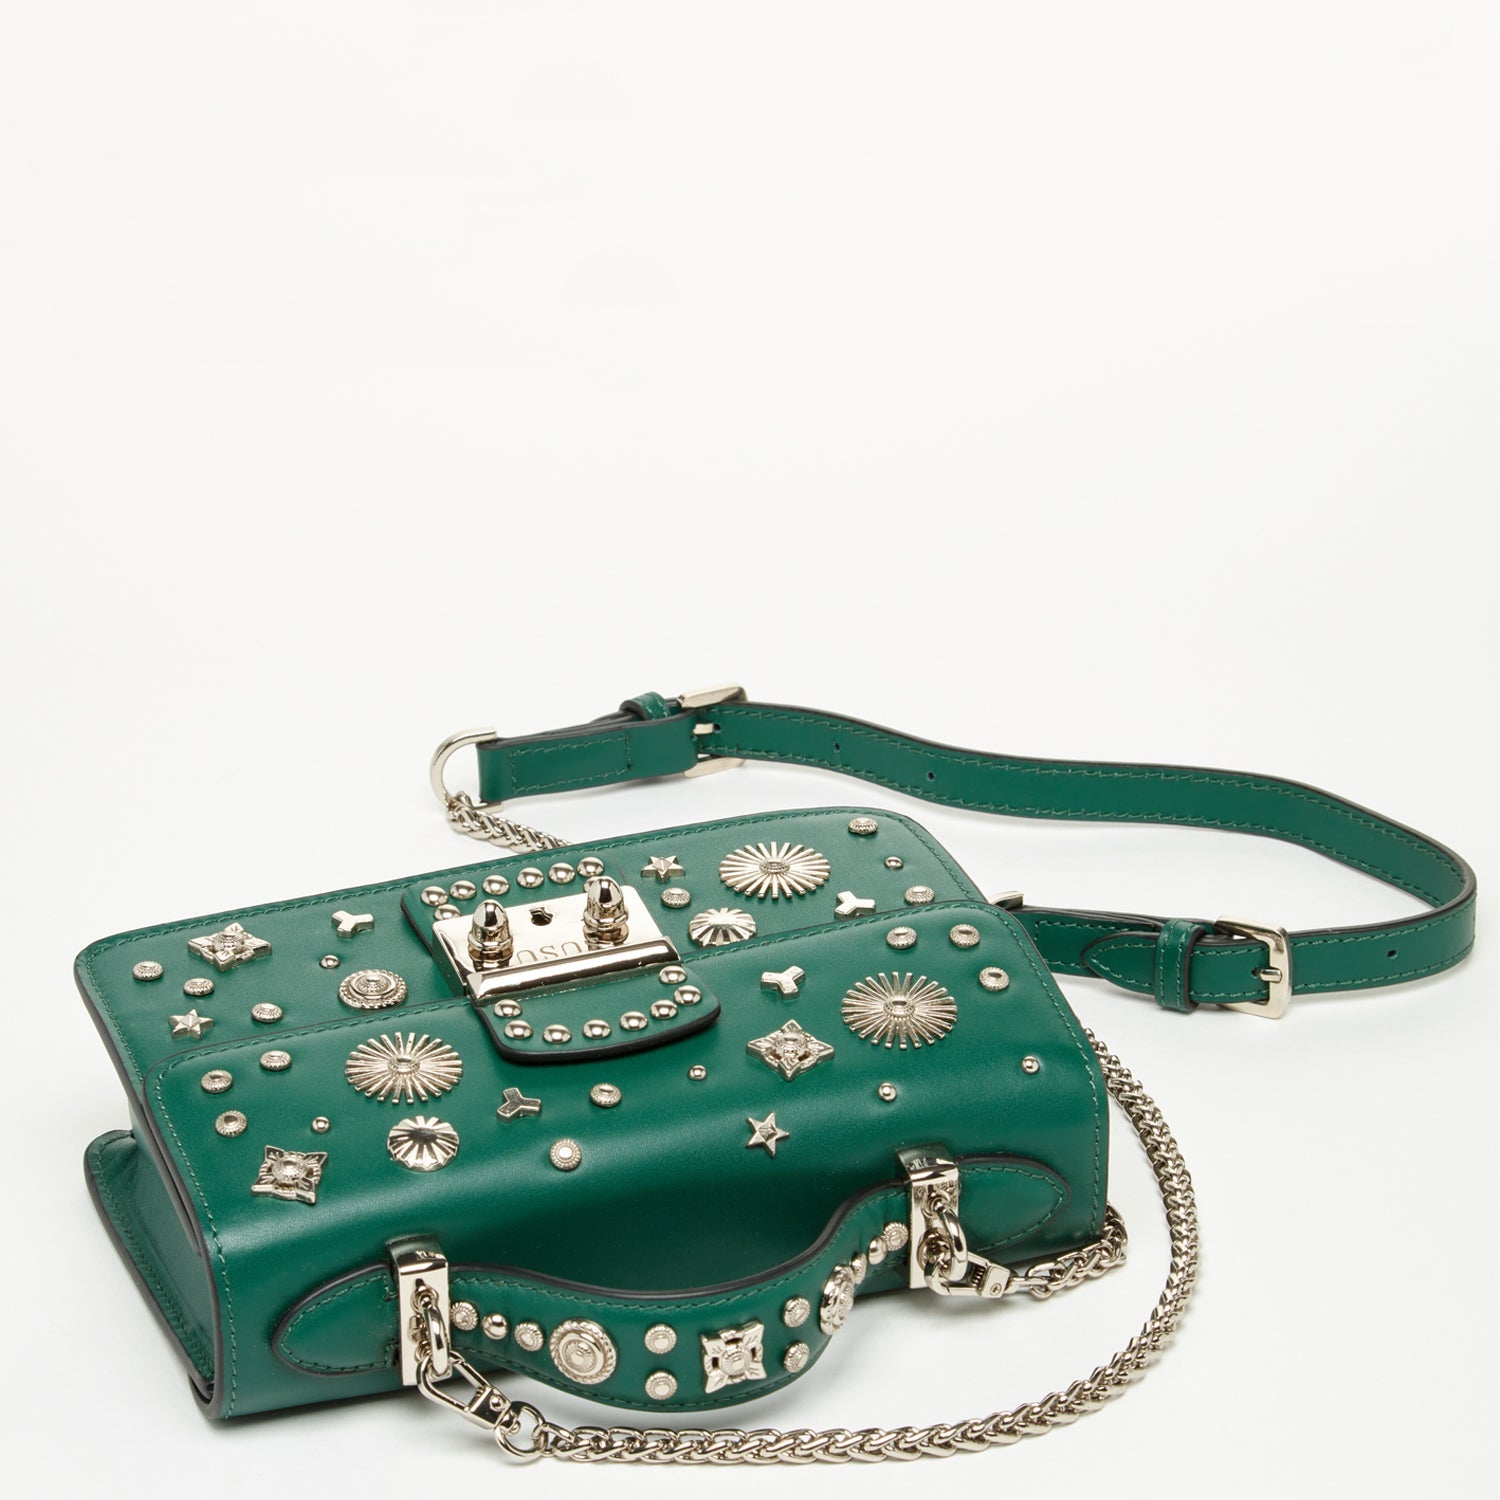 The Hollywood Studded Leather Crossbody Bag Evergreen - Guy Christopher 